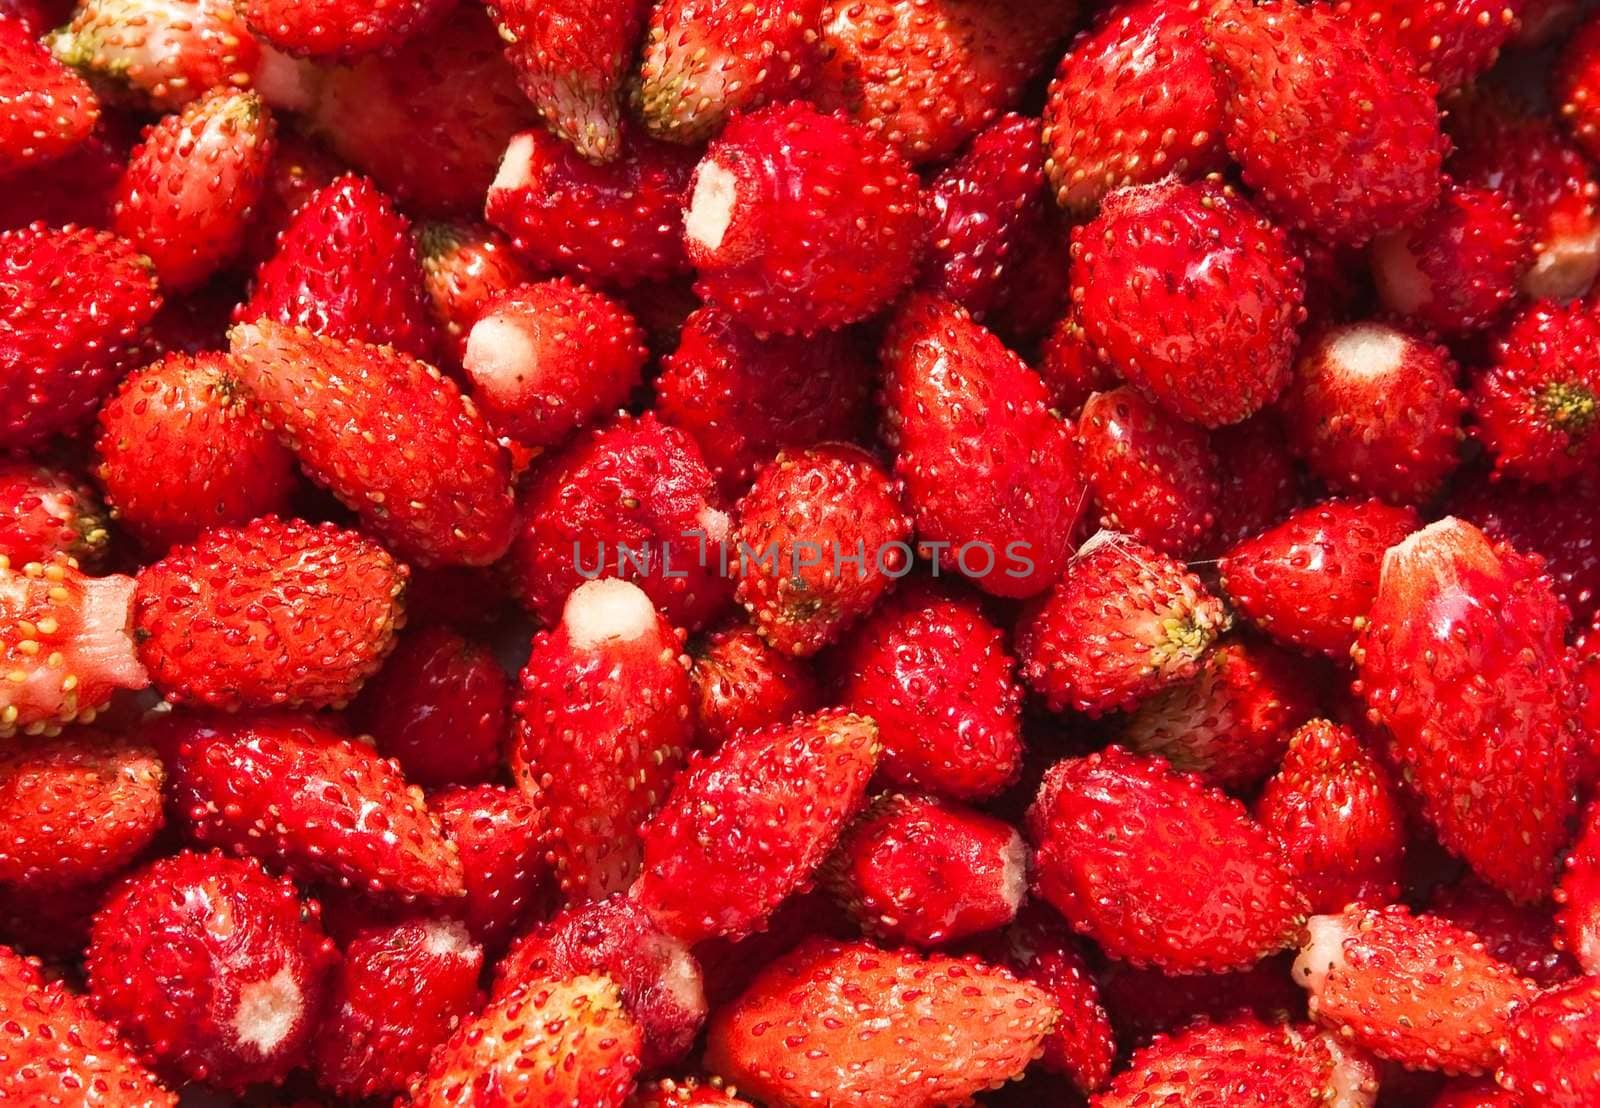 Lots of strawberries arranged as the background by nikolpetr